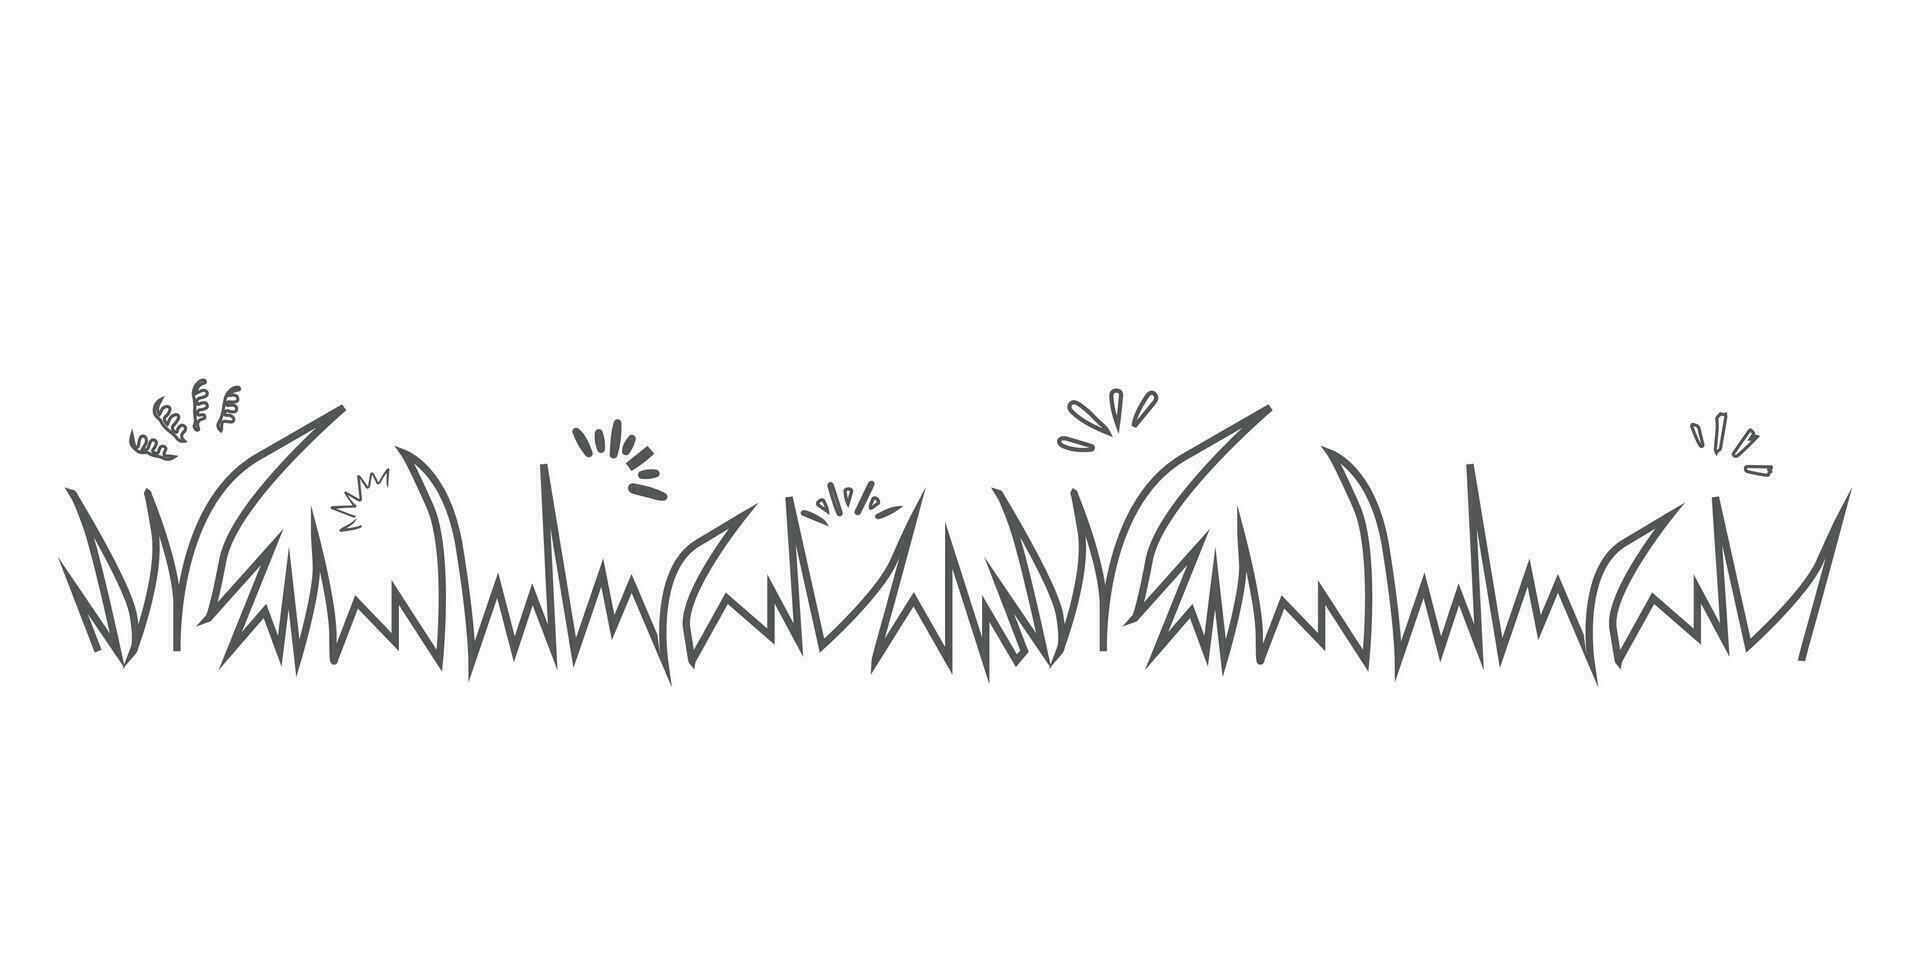 Grass doodle sketch style set. Hand drawn grass field doodle lines background. Sprout elements, grass line strokes. flowers, clover. Vector